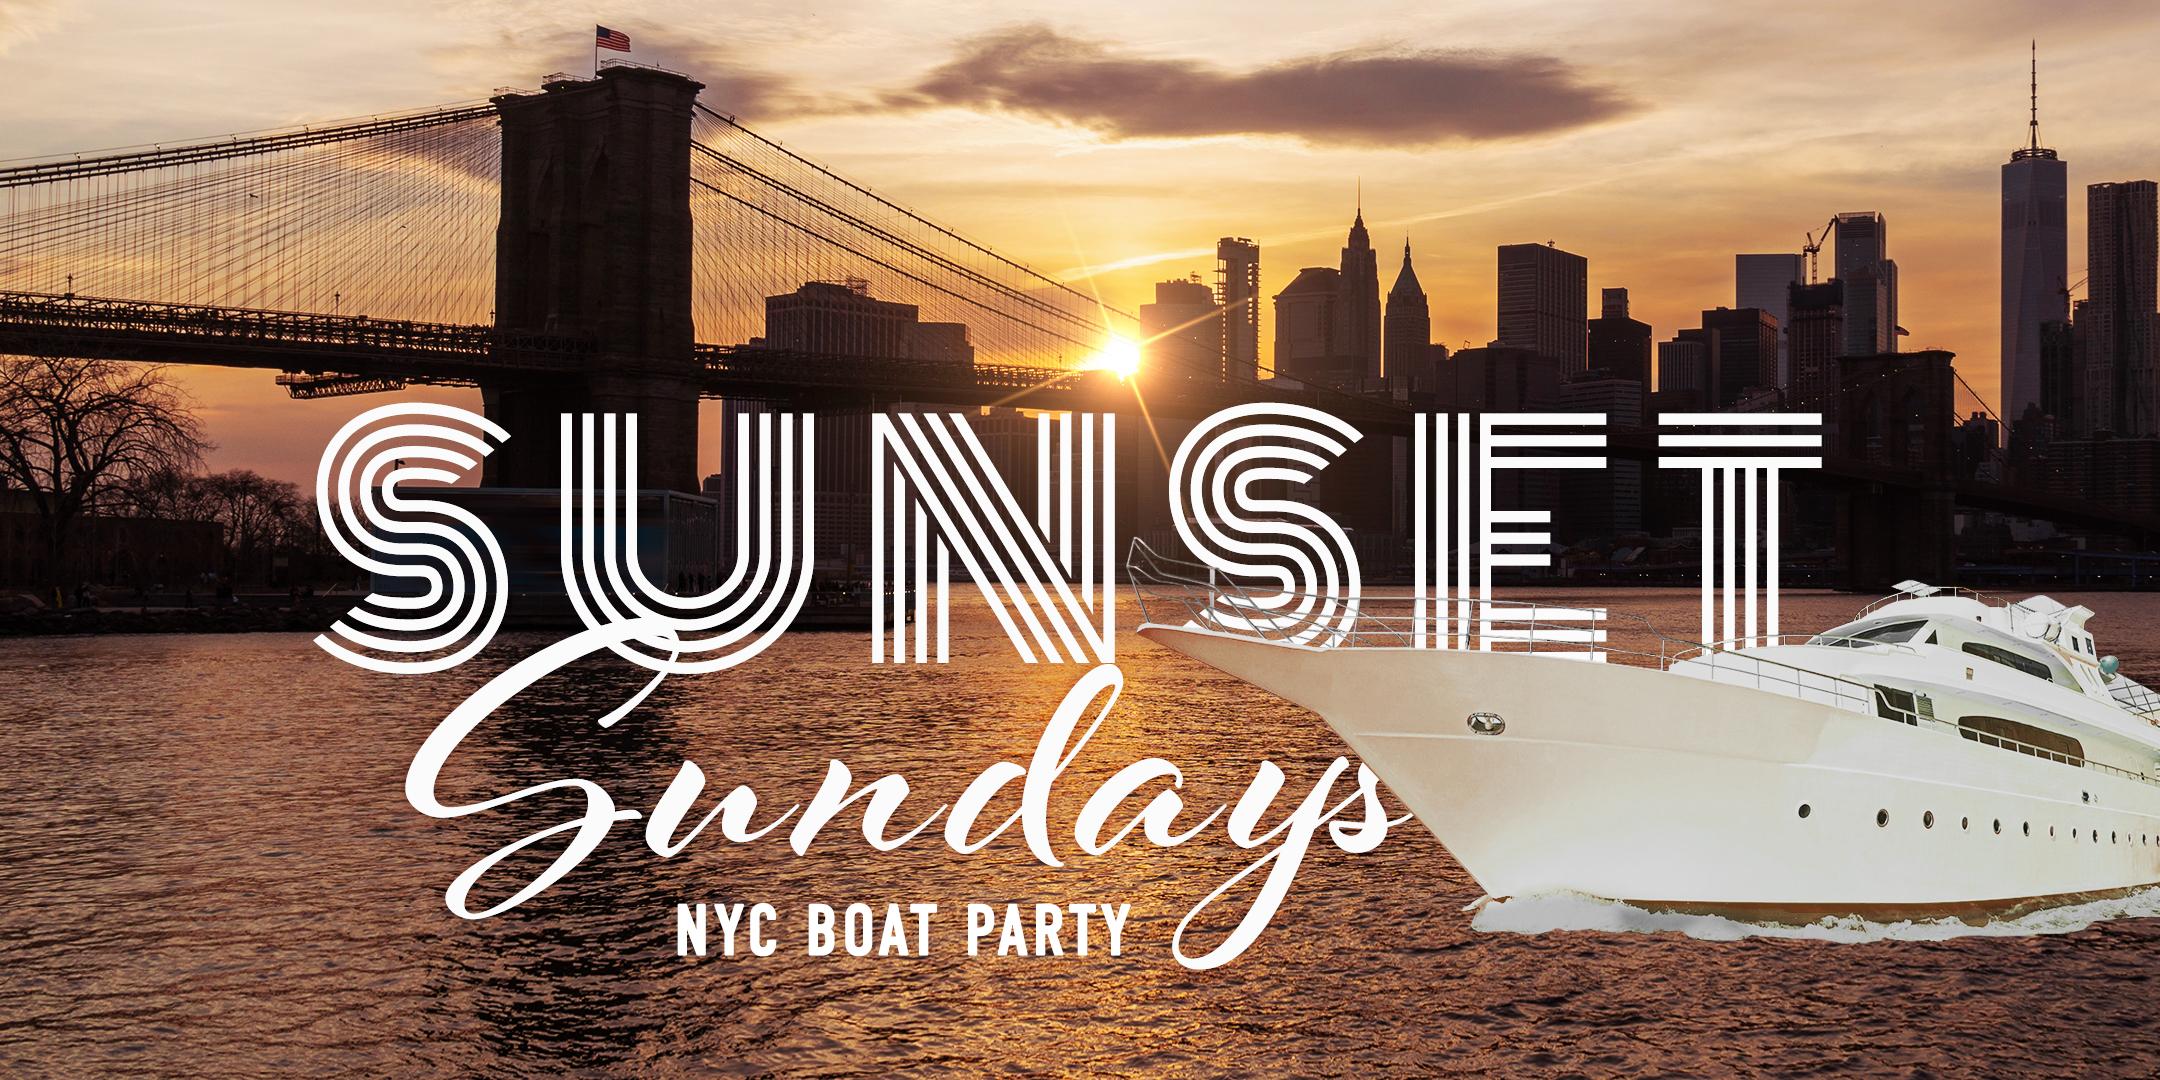 Sunday Sunset Yacht Cruise in Manhattan - Statue of Liberty Sightseeing Boat Party